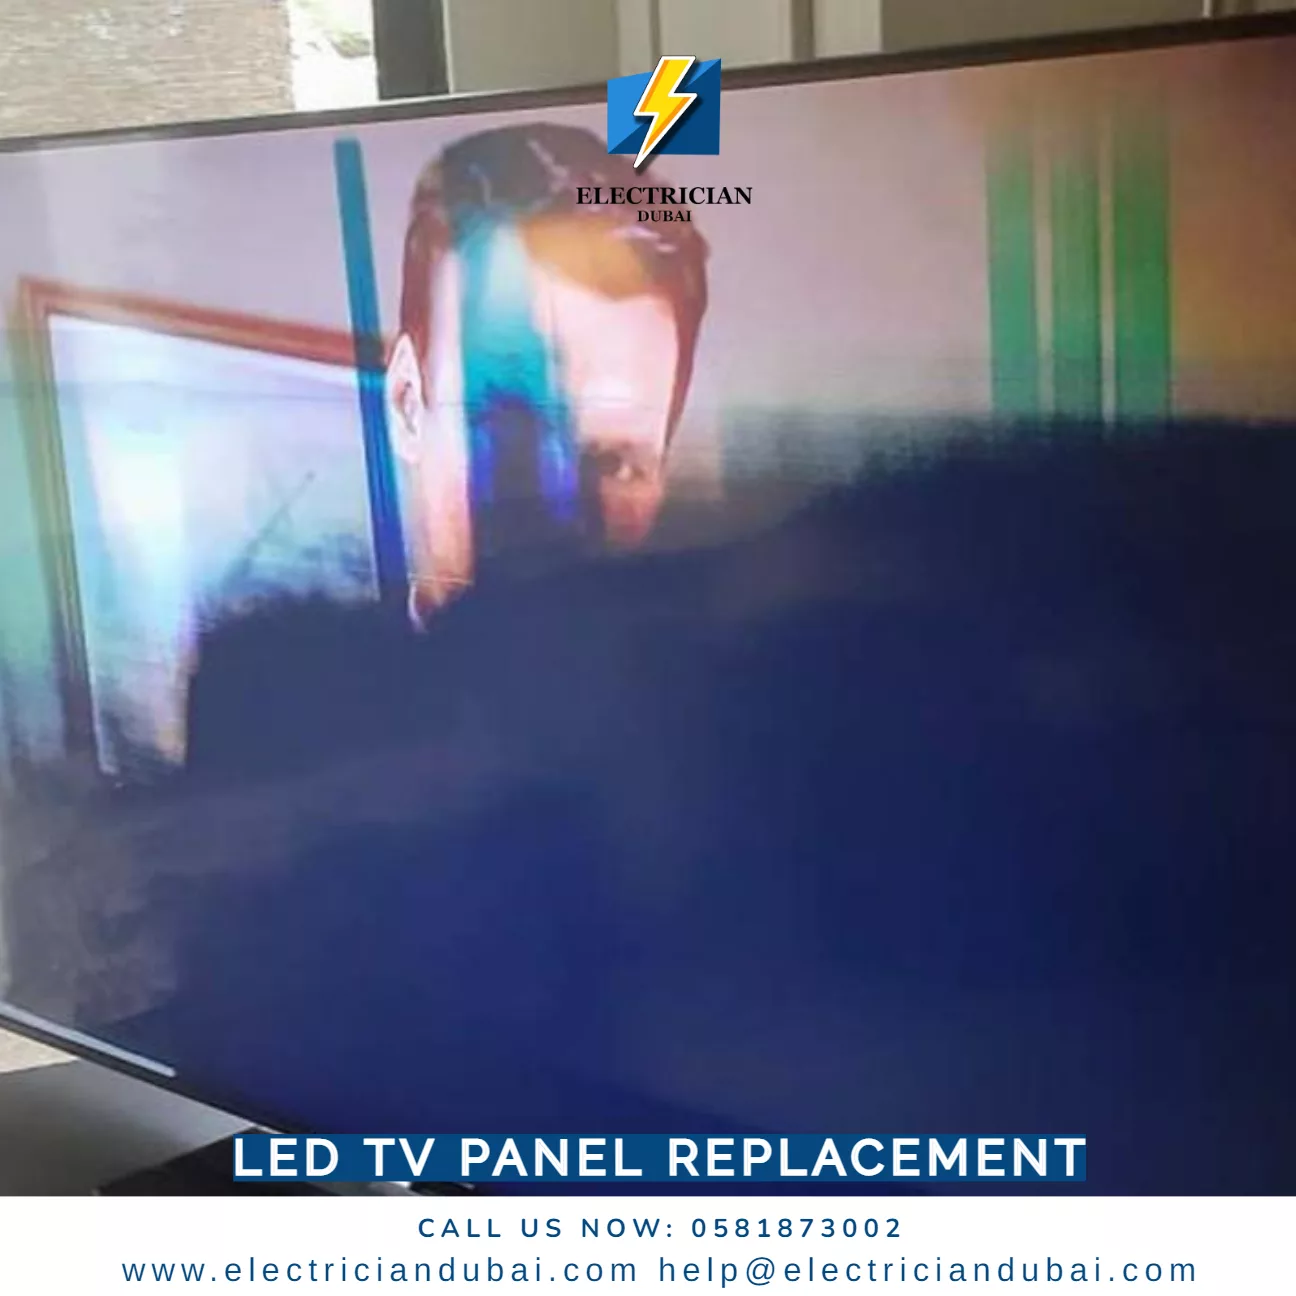 LED TV Panel Replacement